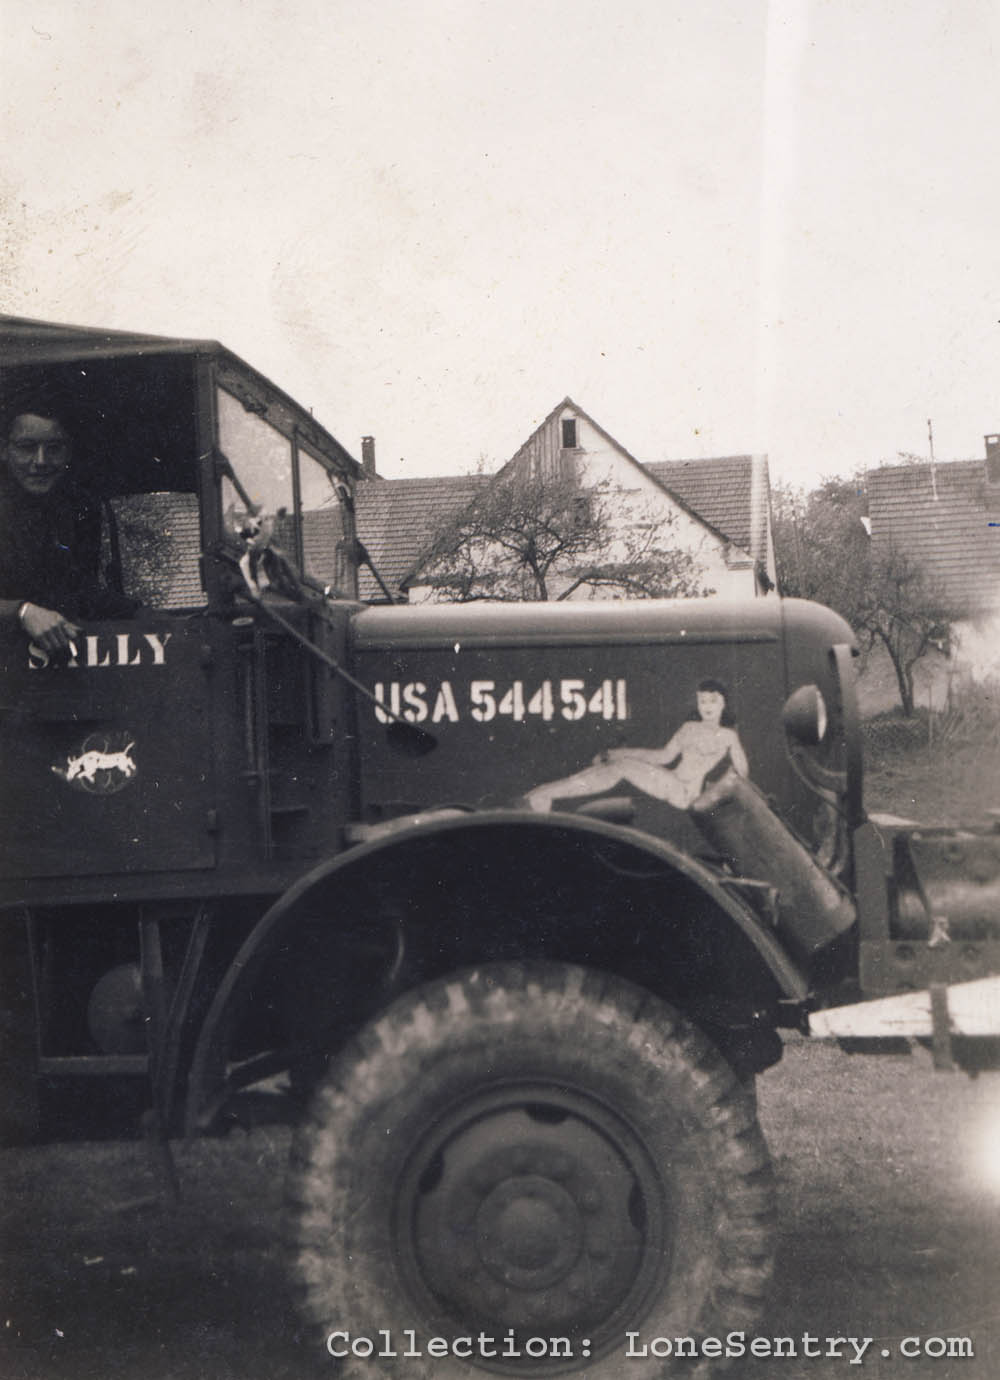 Truck displaying a complete set of markings for the 995th Field Artillery Battalion. (Collection LoneSentry.com)